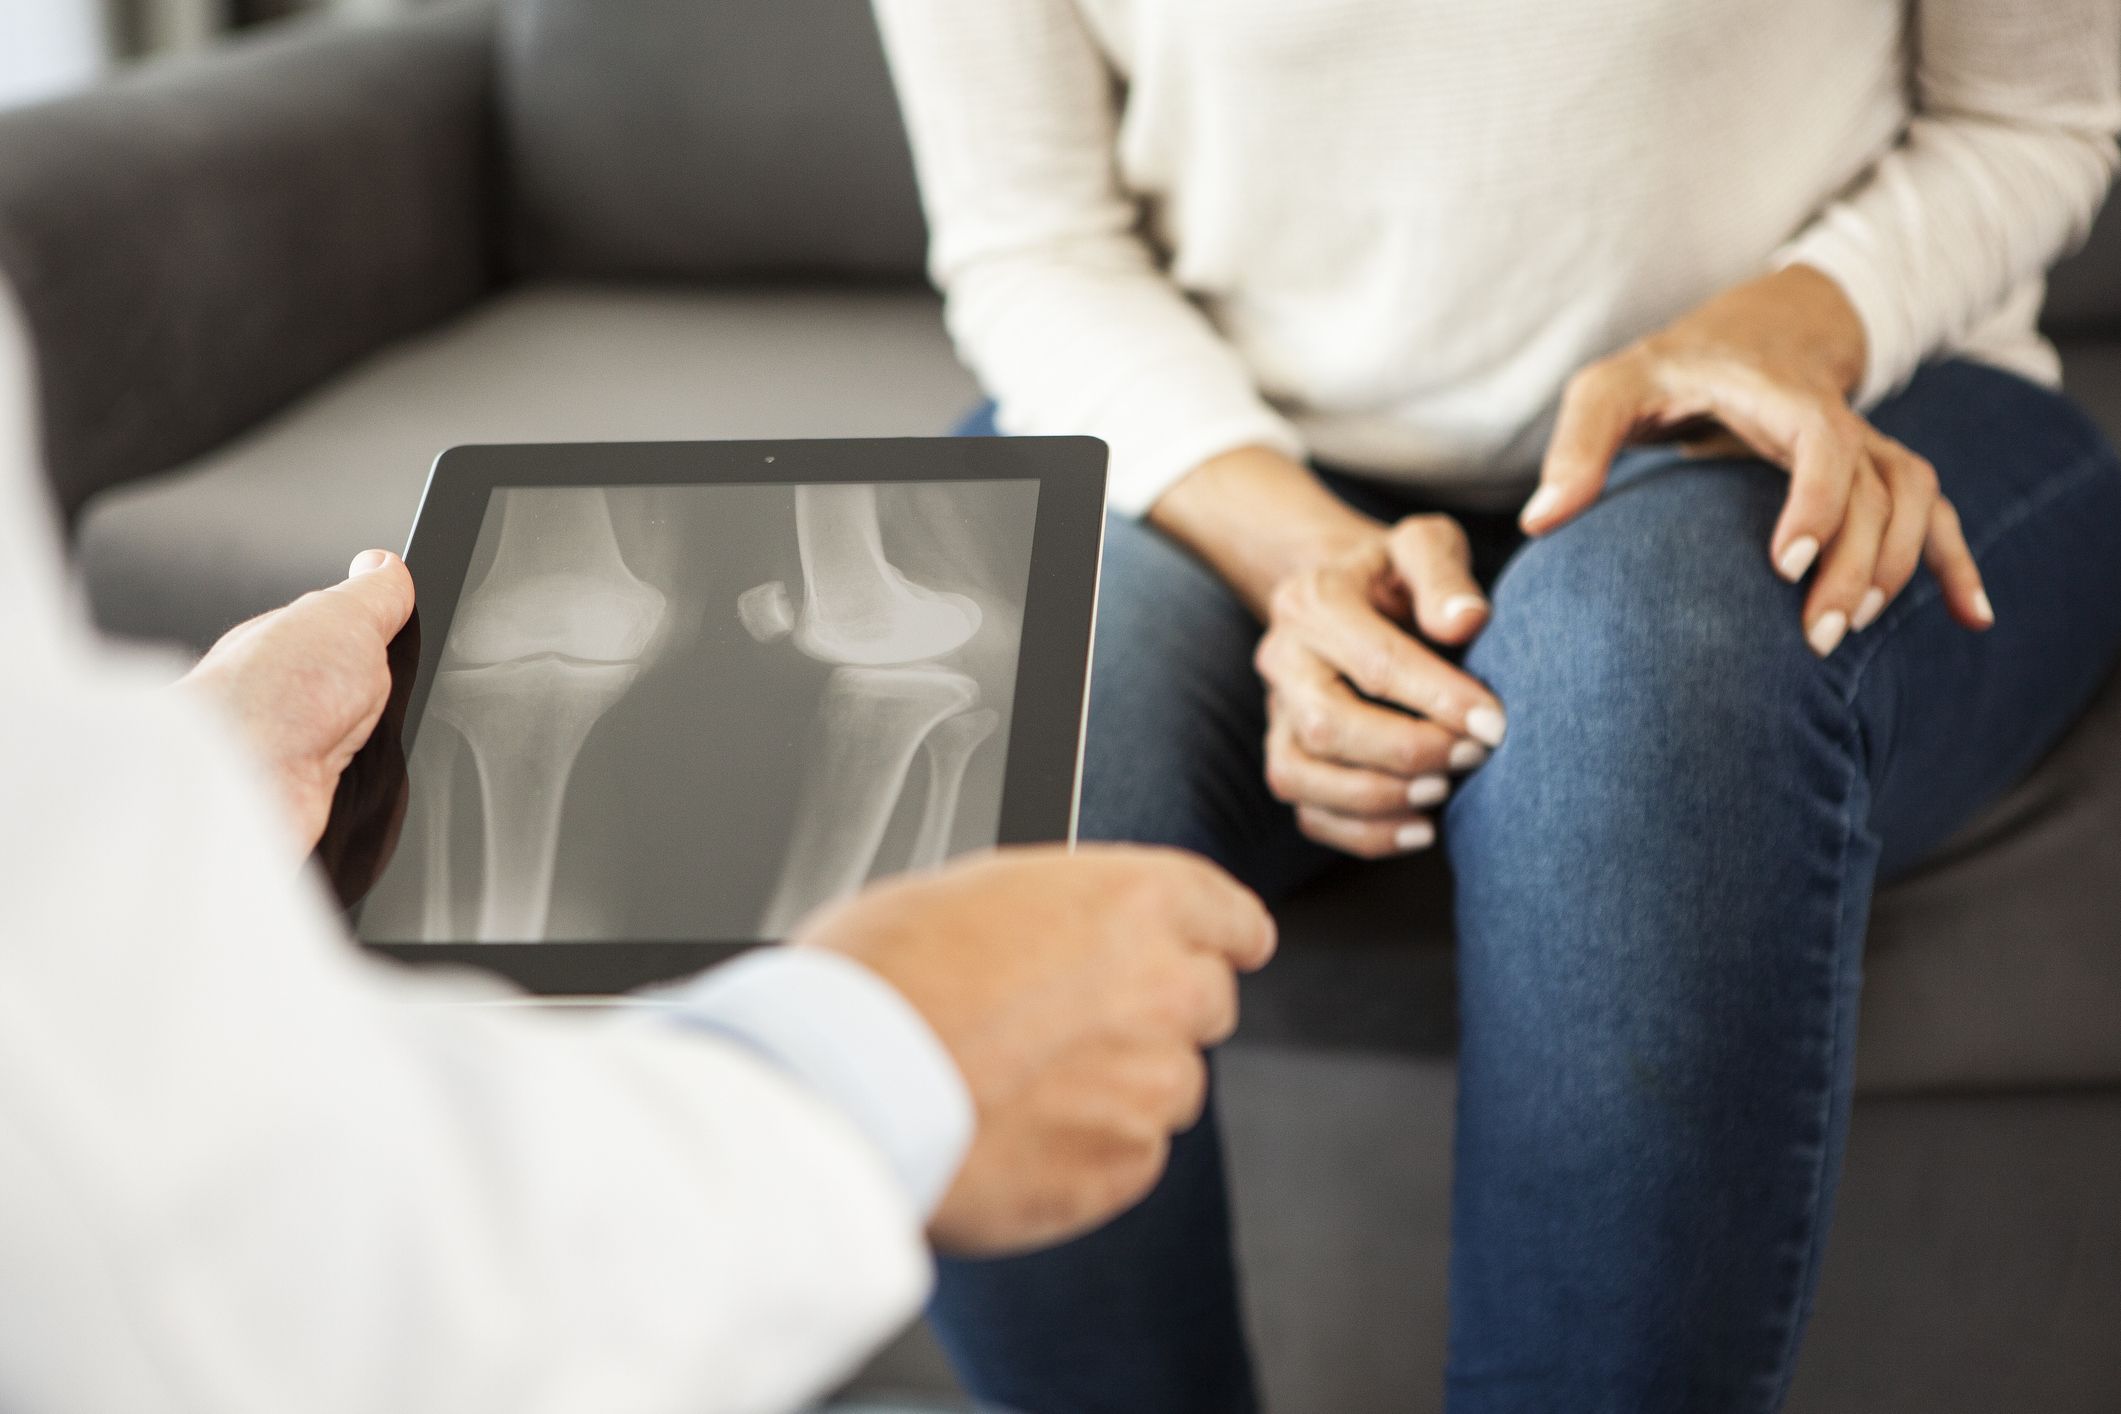 Thinking About Knee Surgery? 6 Things to Try First